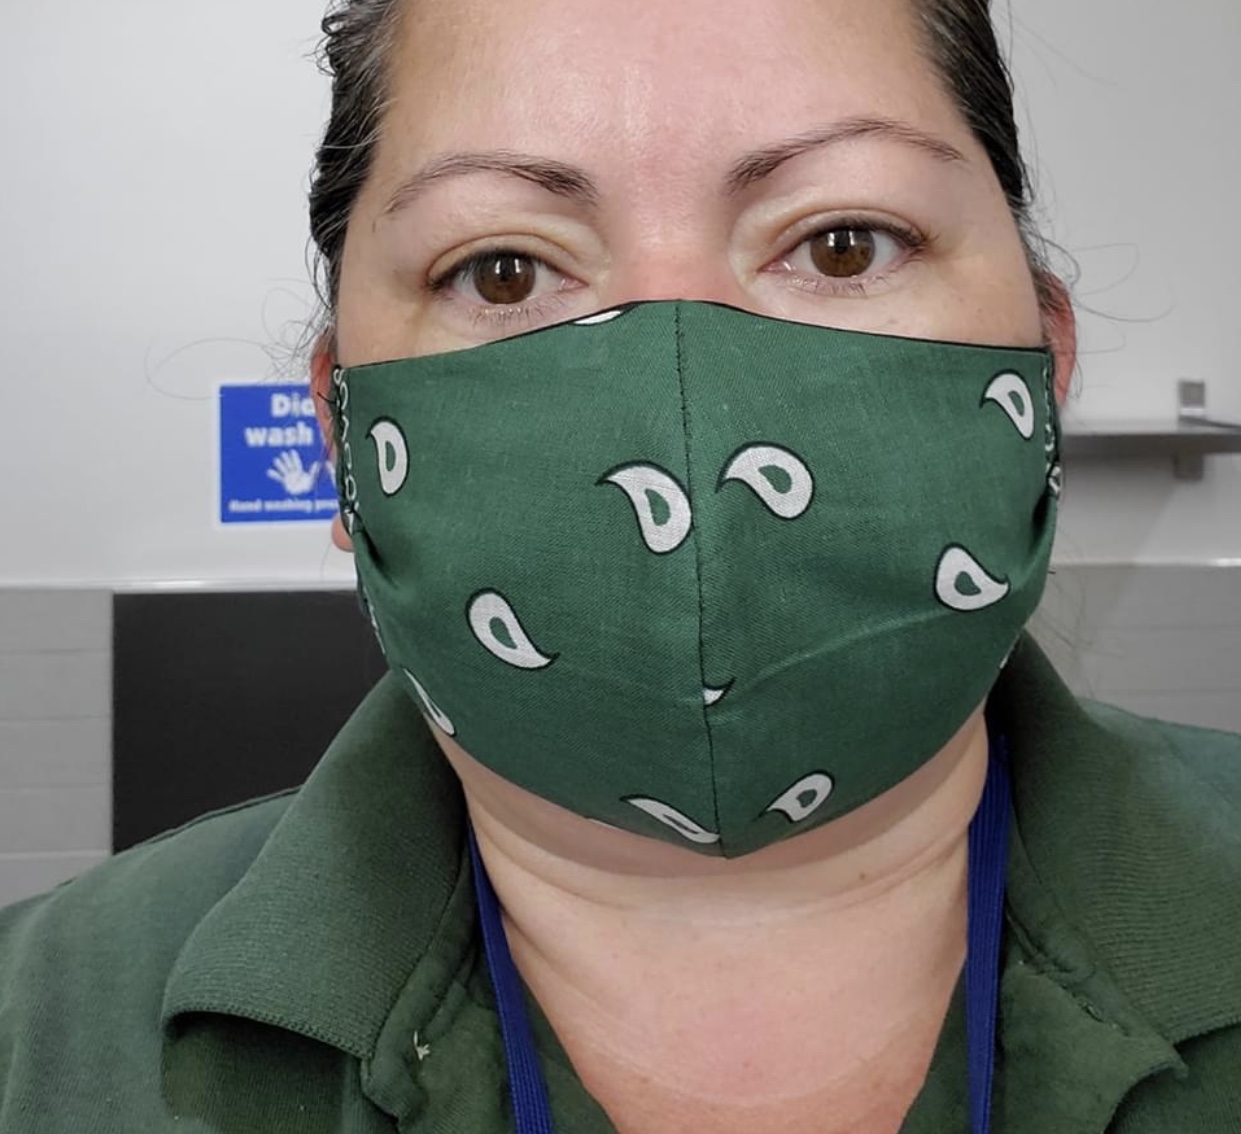 Horticultural technician Sophie Gonzalez hard at work wearing the new custom mask she designed!